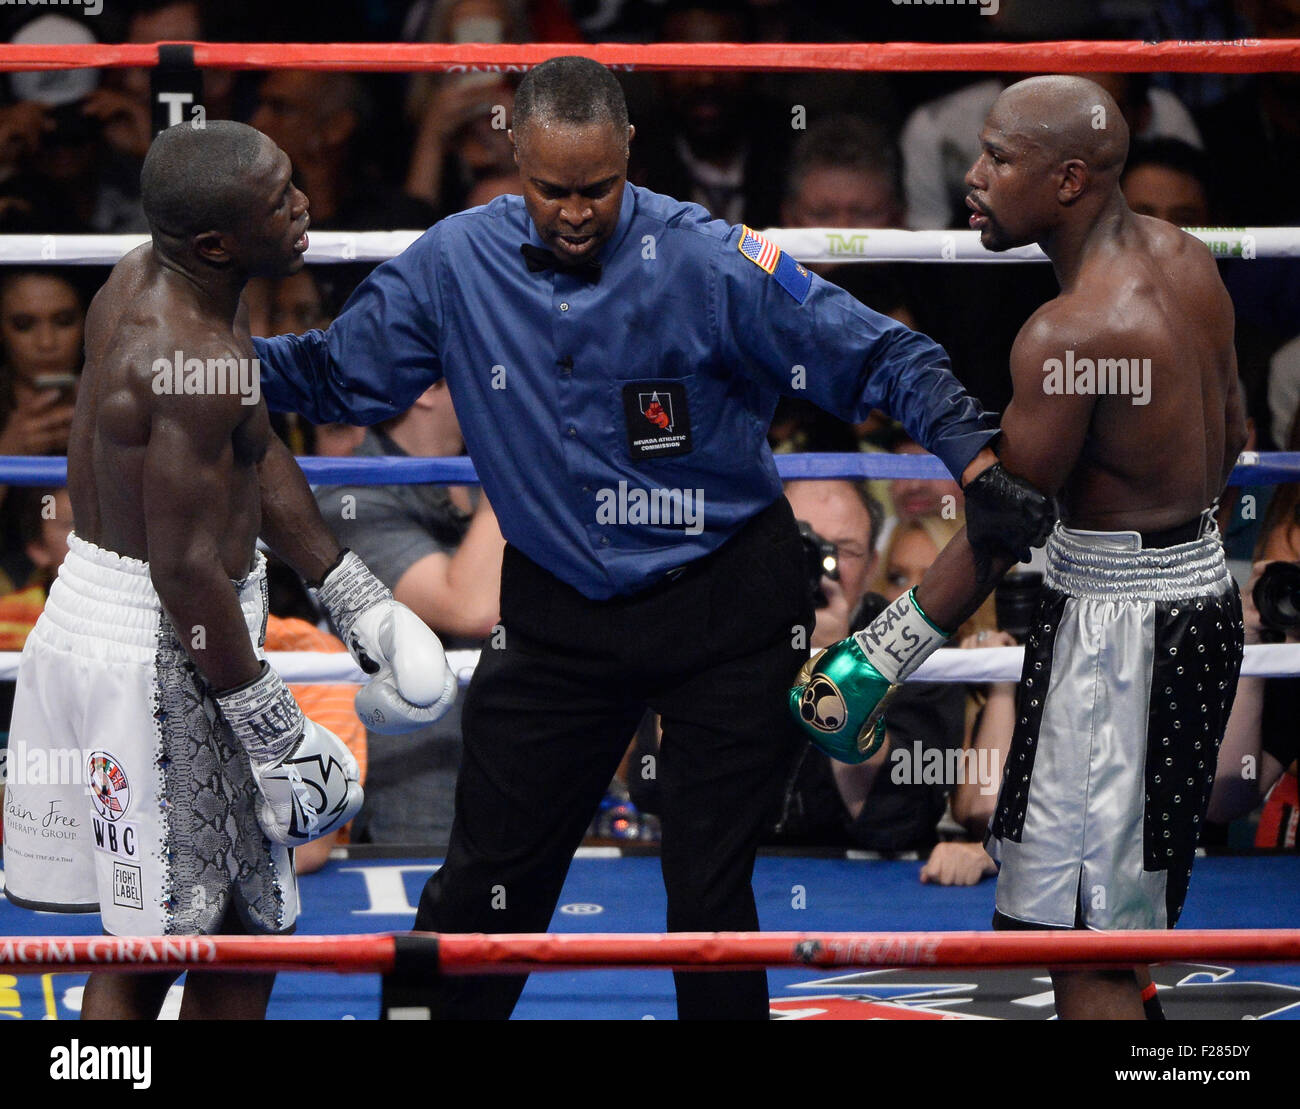 Las Vegas NV, USA. 12th Sep, 2015. (C) Referee Kenny Bayless gets in the middle of Floyd Mayweather Jr. and Andre Berto a they exchange words with each other Saturday at the MGM Grand Hotel. Floyd Mayweather Jr. took the win by Unanimous decision for the WBC&WBA world welterweight title. Floyd Mayweather Jr. has said that this will be his final fight of his 19yr career. Photo by: Gene Blevins/LA DailyNews/ZumaPress © Gene Blevins/ZUMA Wire/Alamy Live News Stock Photo